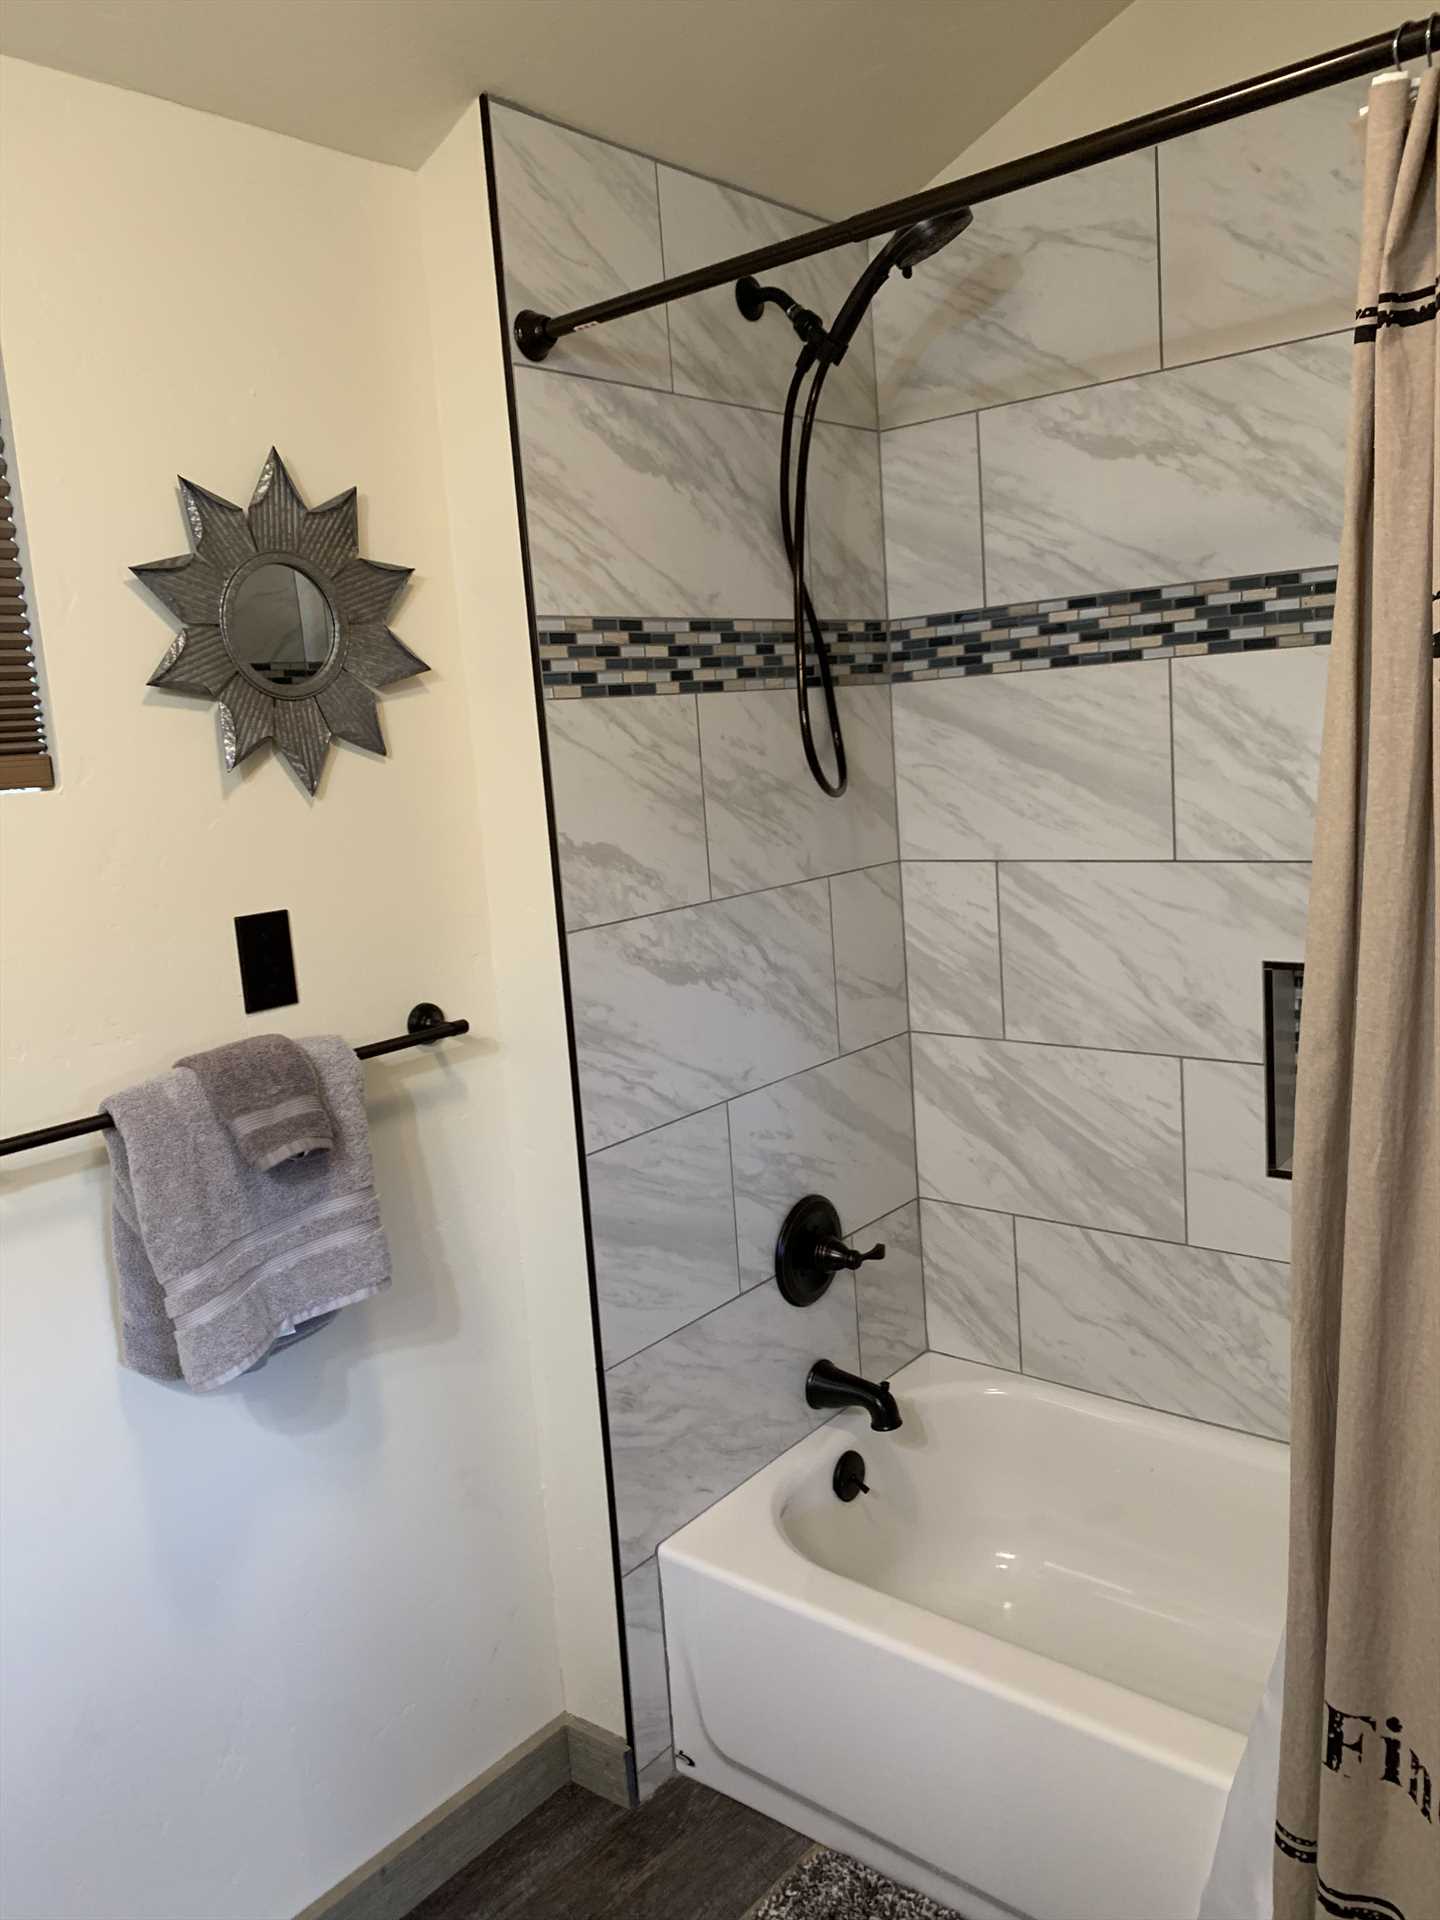                                                 Clean up in style and comfort in the shower and tub combo in the cabin's full bath!